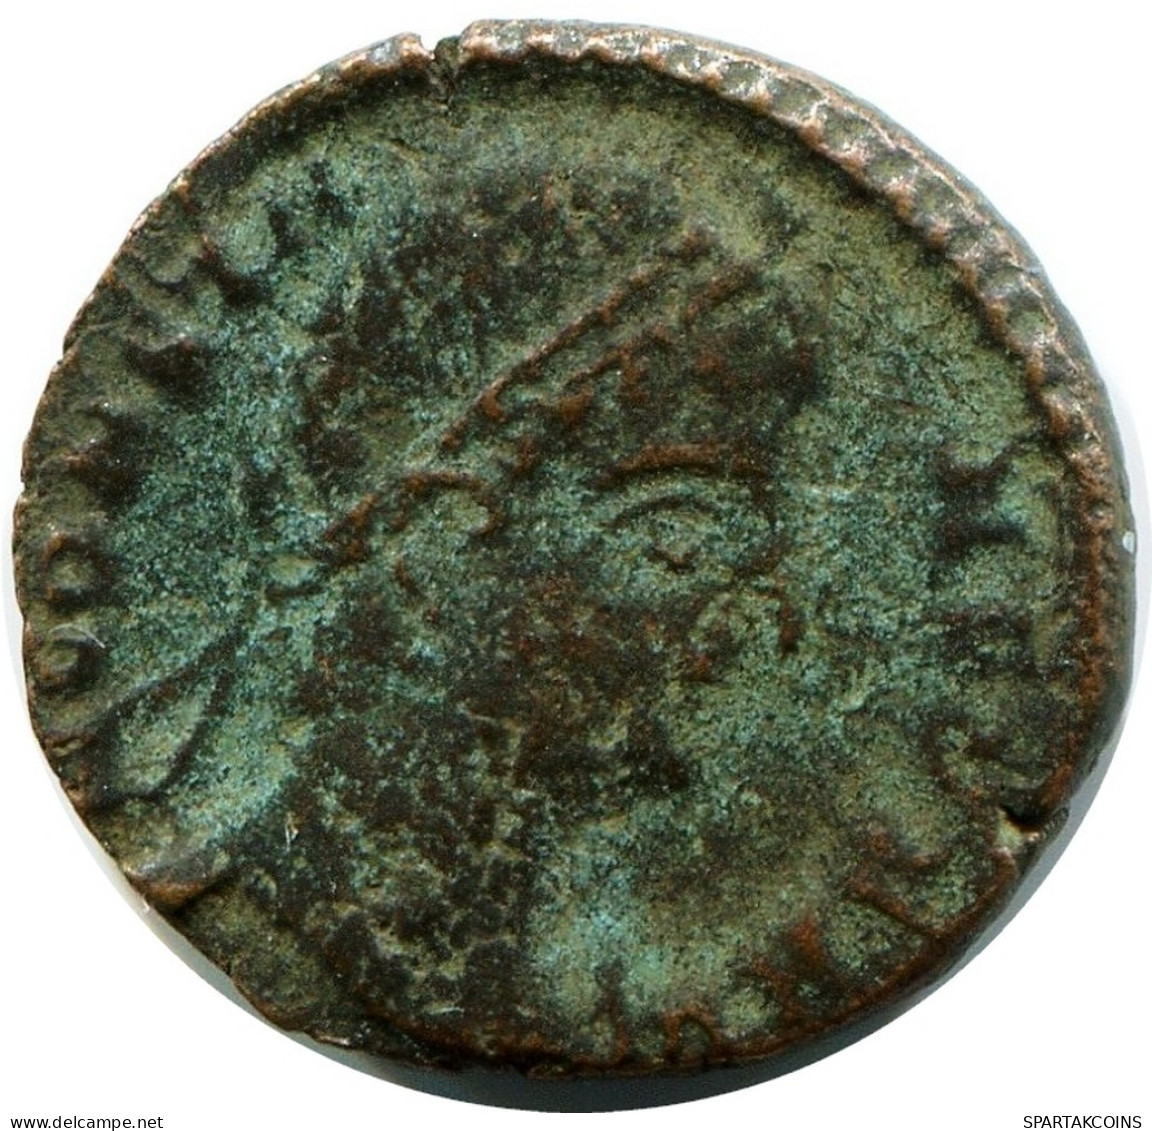 CONSTANS MINTED IN CYZICUS FROM THE ROYAL ONTARIO MUSEUM #ANC11589.14.F.A - L'Empire Chrétien (307 à 363)